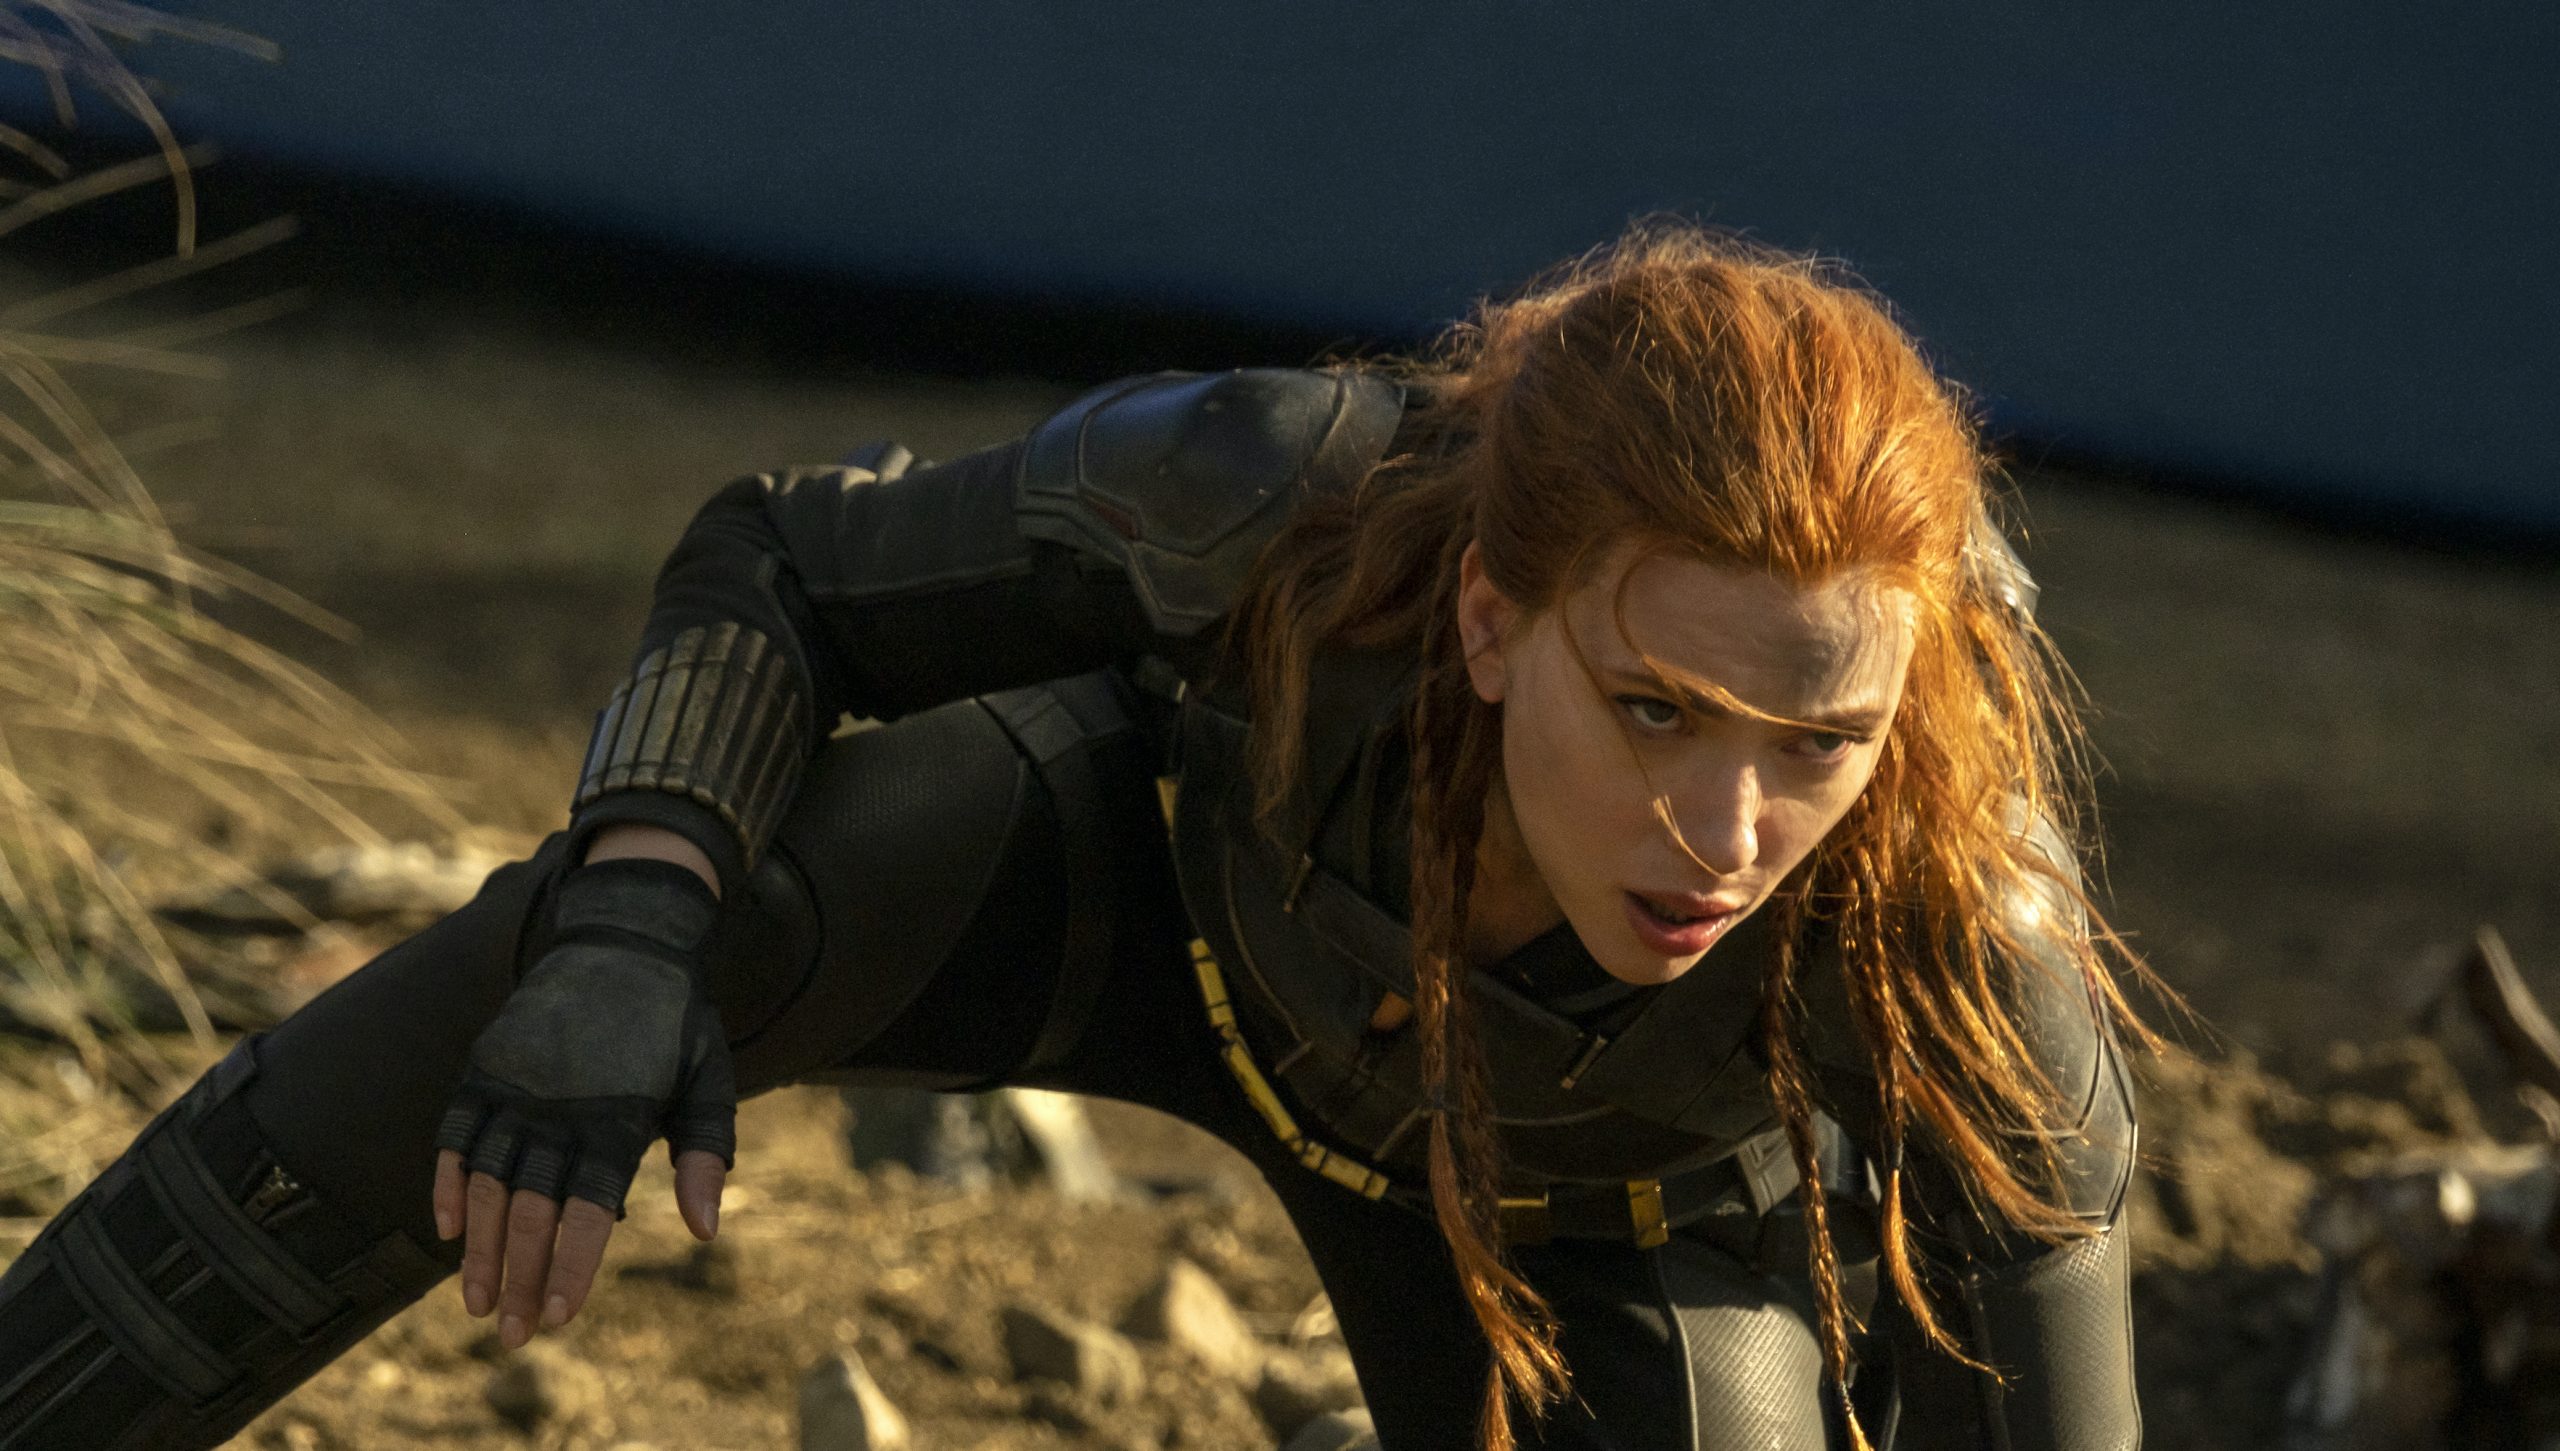 'Black Widow' breaks post-pandemic box office records on its opening weekend